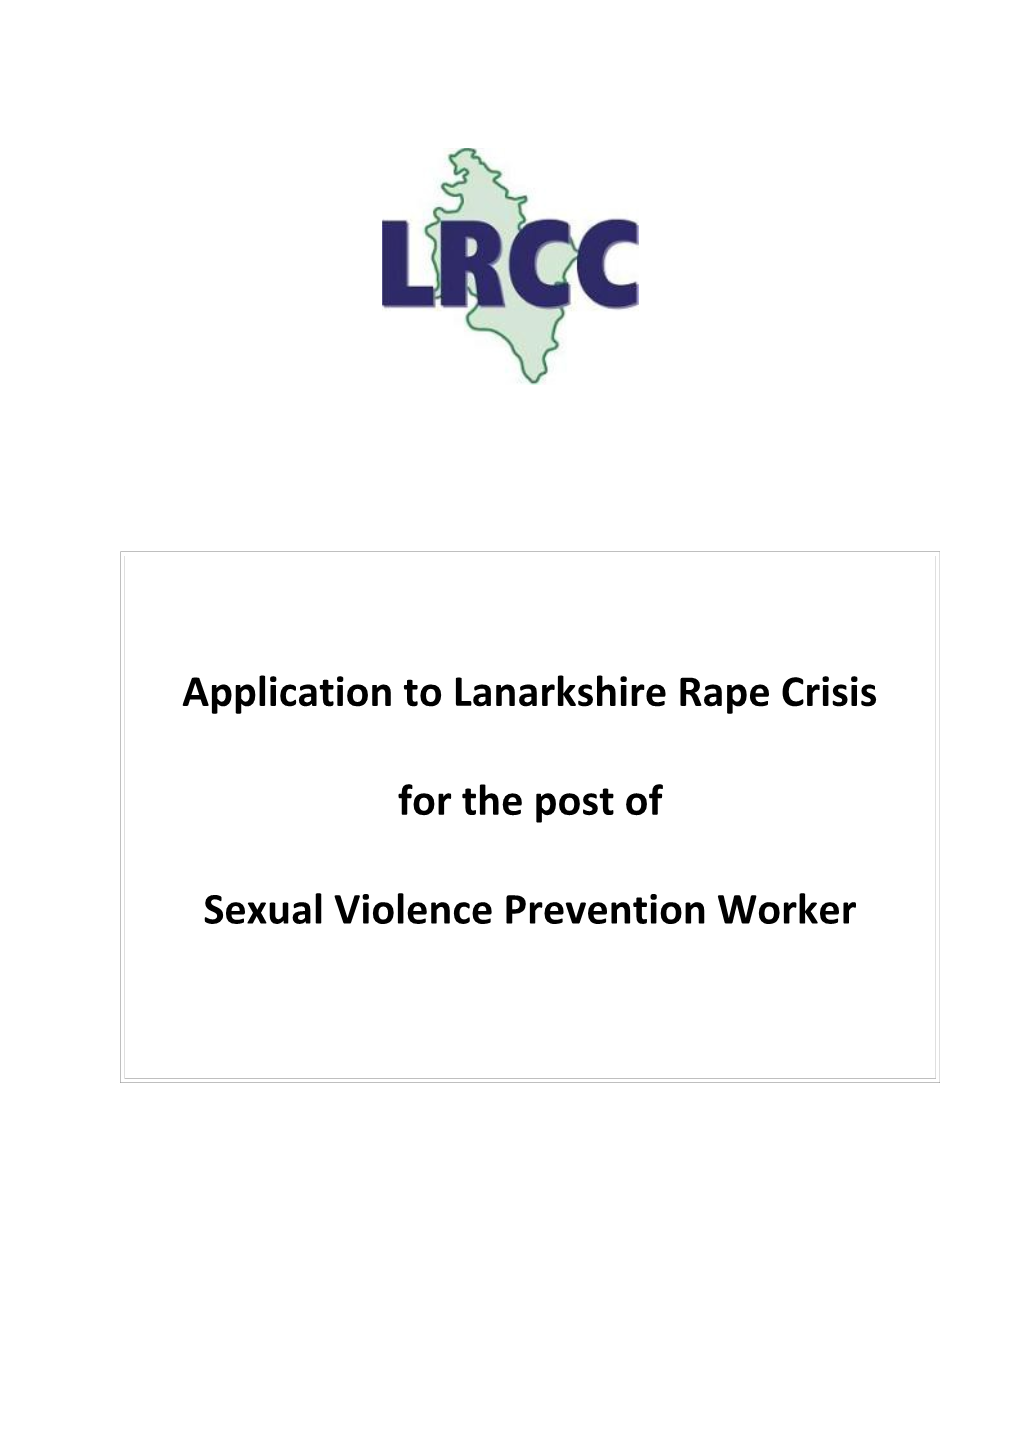 For the Post of Sexual Violence Prevention Worker